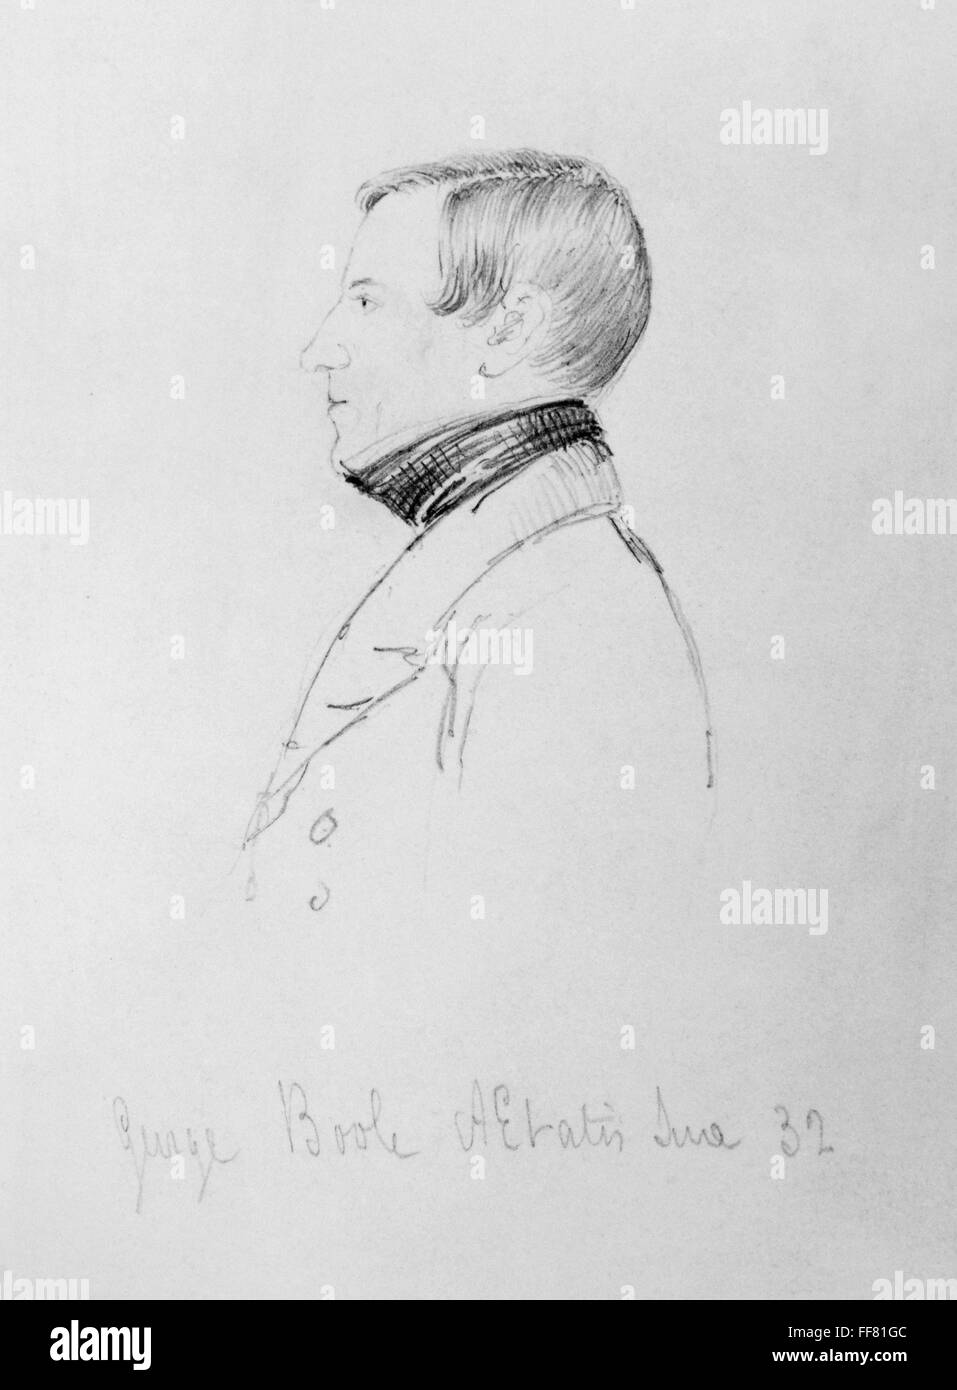 GEORGE BOOLE (1815-1864). /nEnglish mathematician and logician. Pencil drawing, 1847, by an unknown artist. Stock Photo